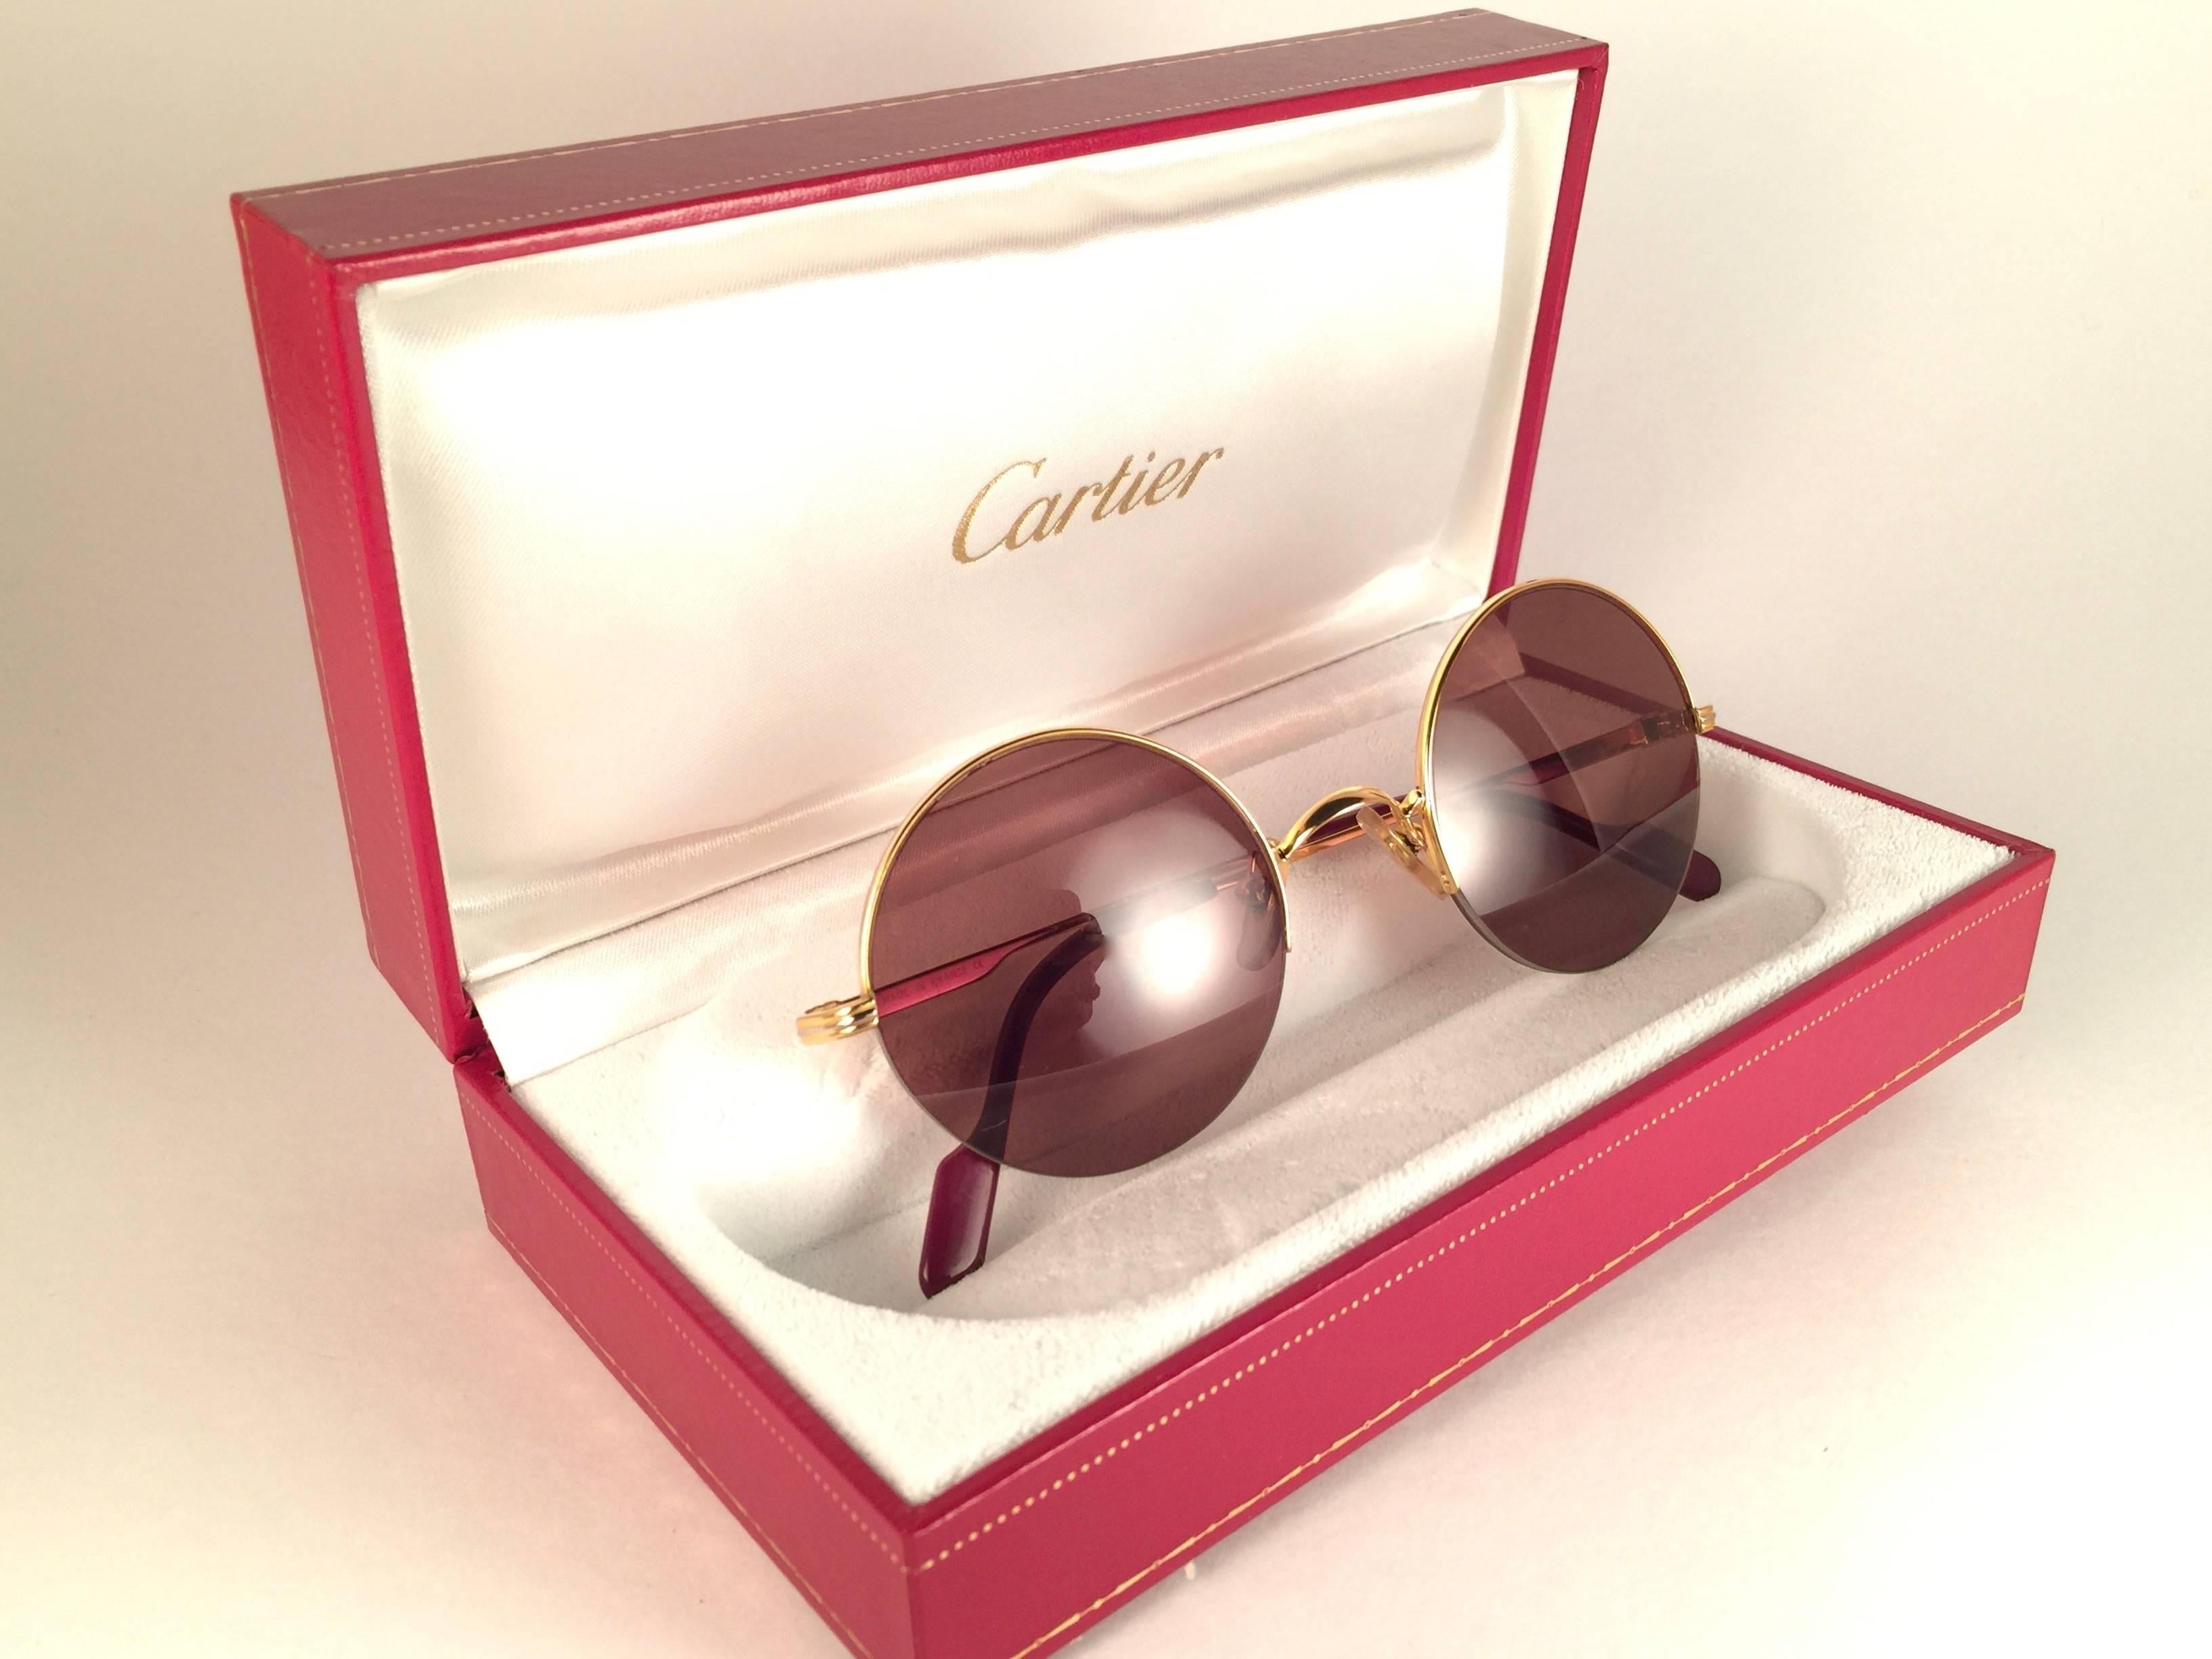  New 1990 Cartier Mayfair half frame sunglasses with brown (uv protection) lenses.  Frame is with the front and sides in gold. All hallmarks. Cartier gold signs on the ear paddles.  These are like a pair of jewels on your nose. Beautiful design and